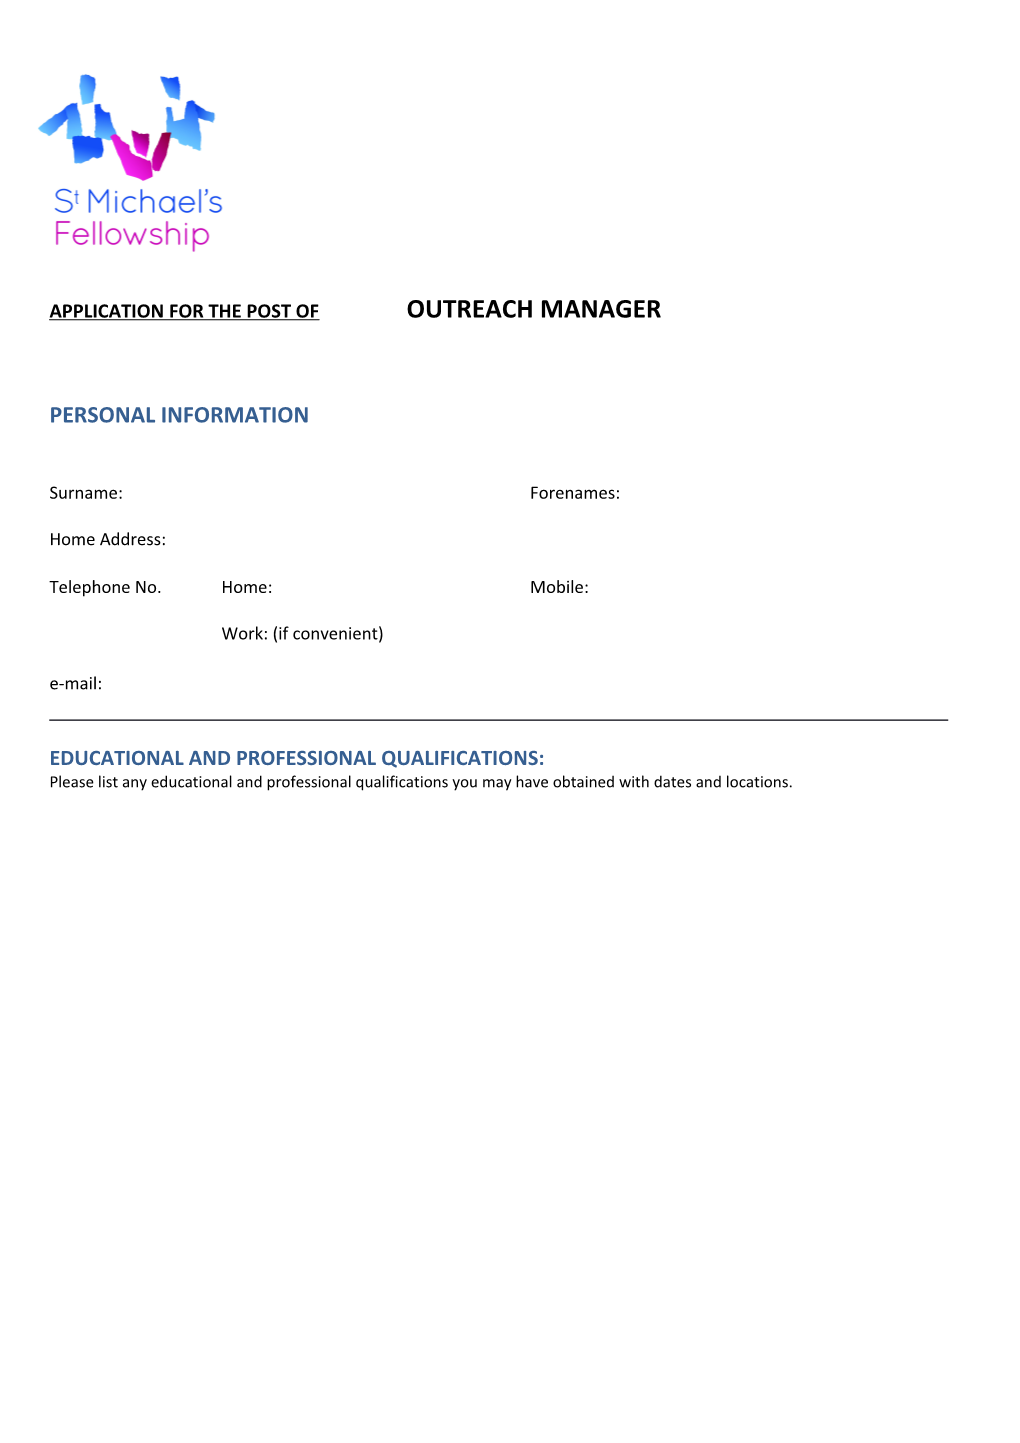 Application for the Post Ofoutreach Manager